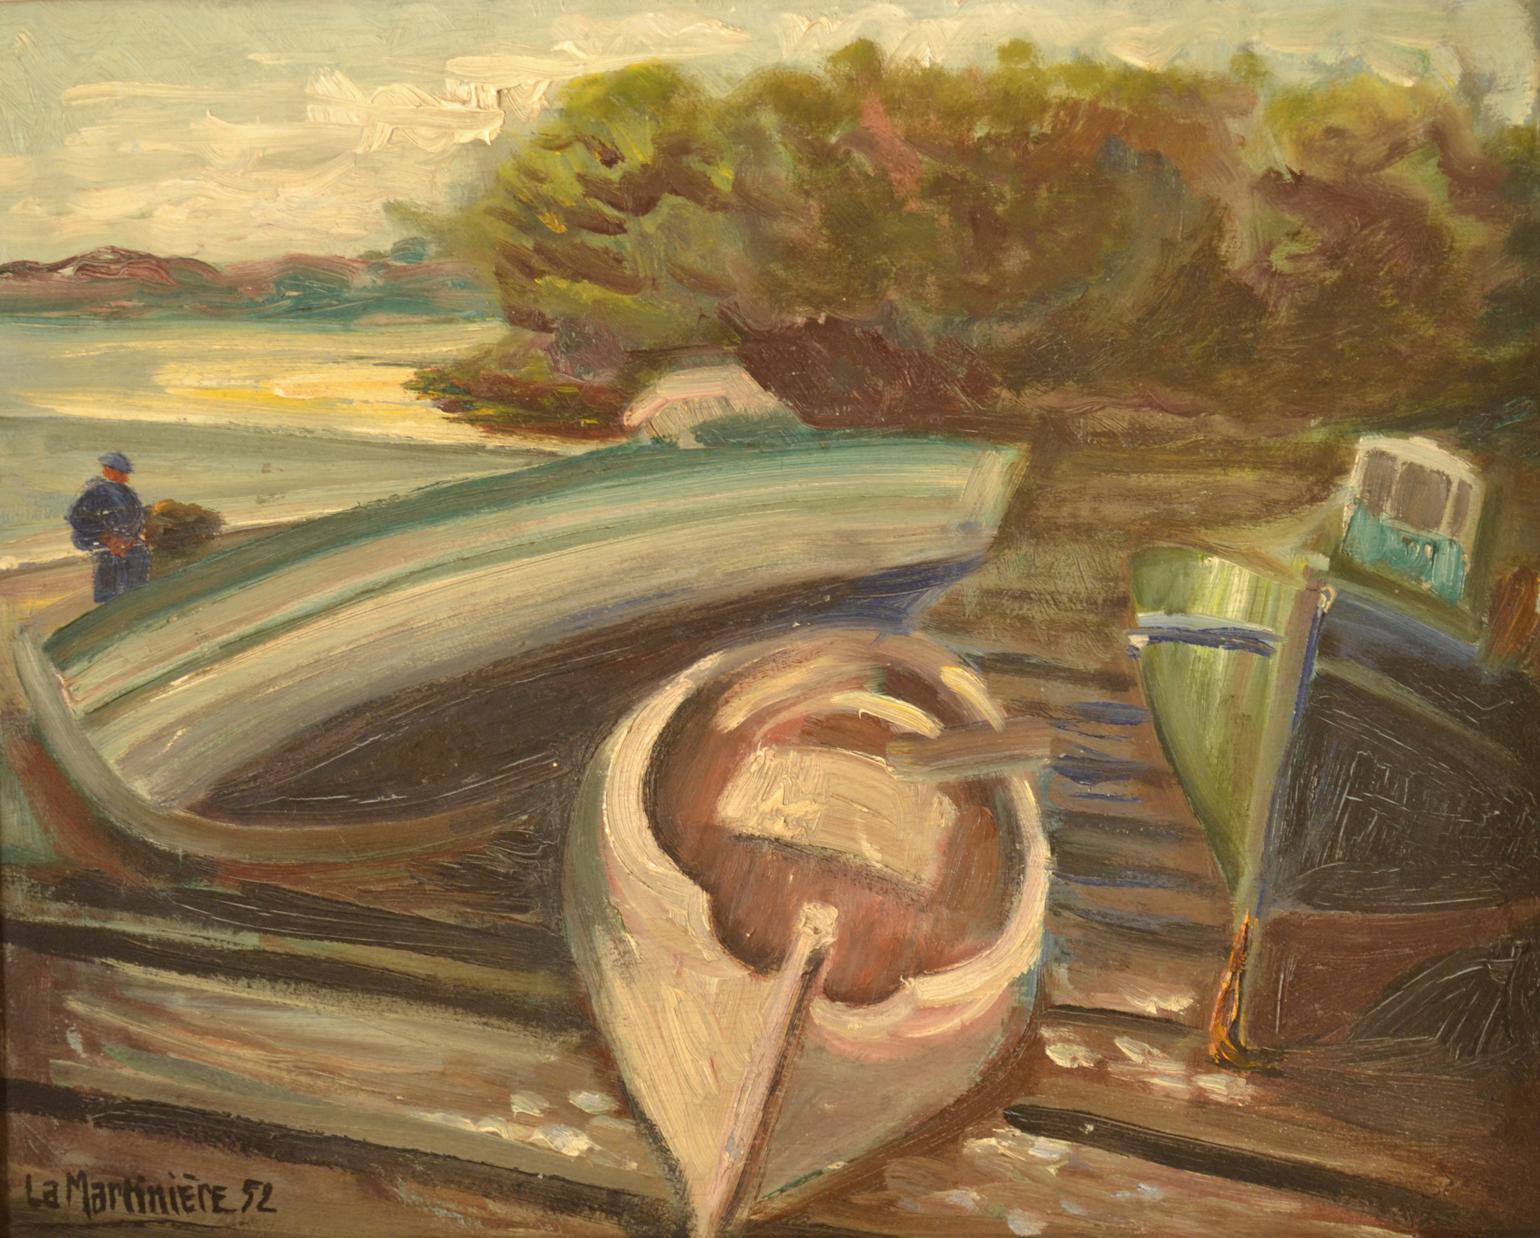 Expressive oil painting on wood panel French by La Martiniere in 1952. The painting depicts fisherman and three small fishing boats laying on the shore. It is painted in large brush strokes full of texture to express the moment.
The painting